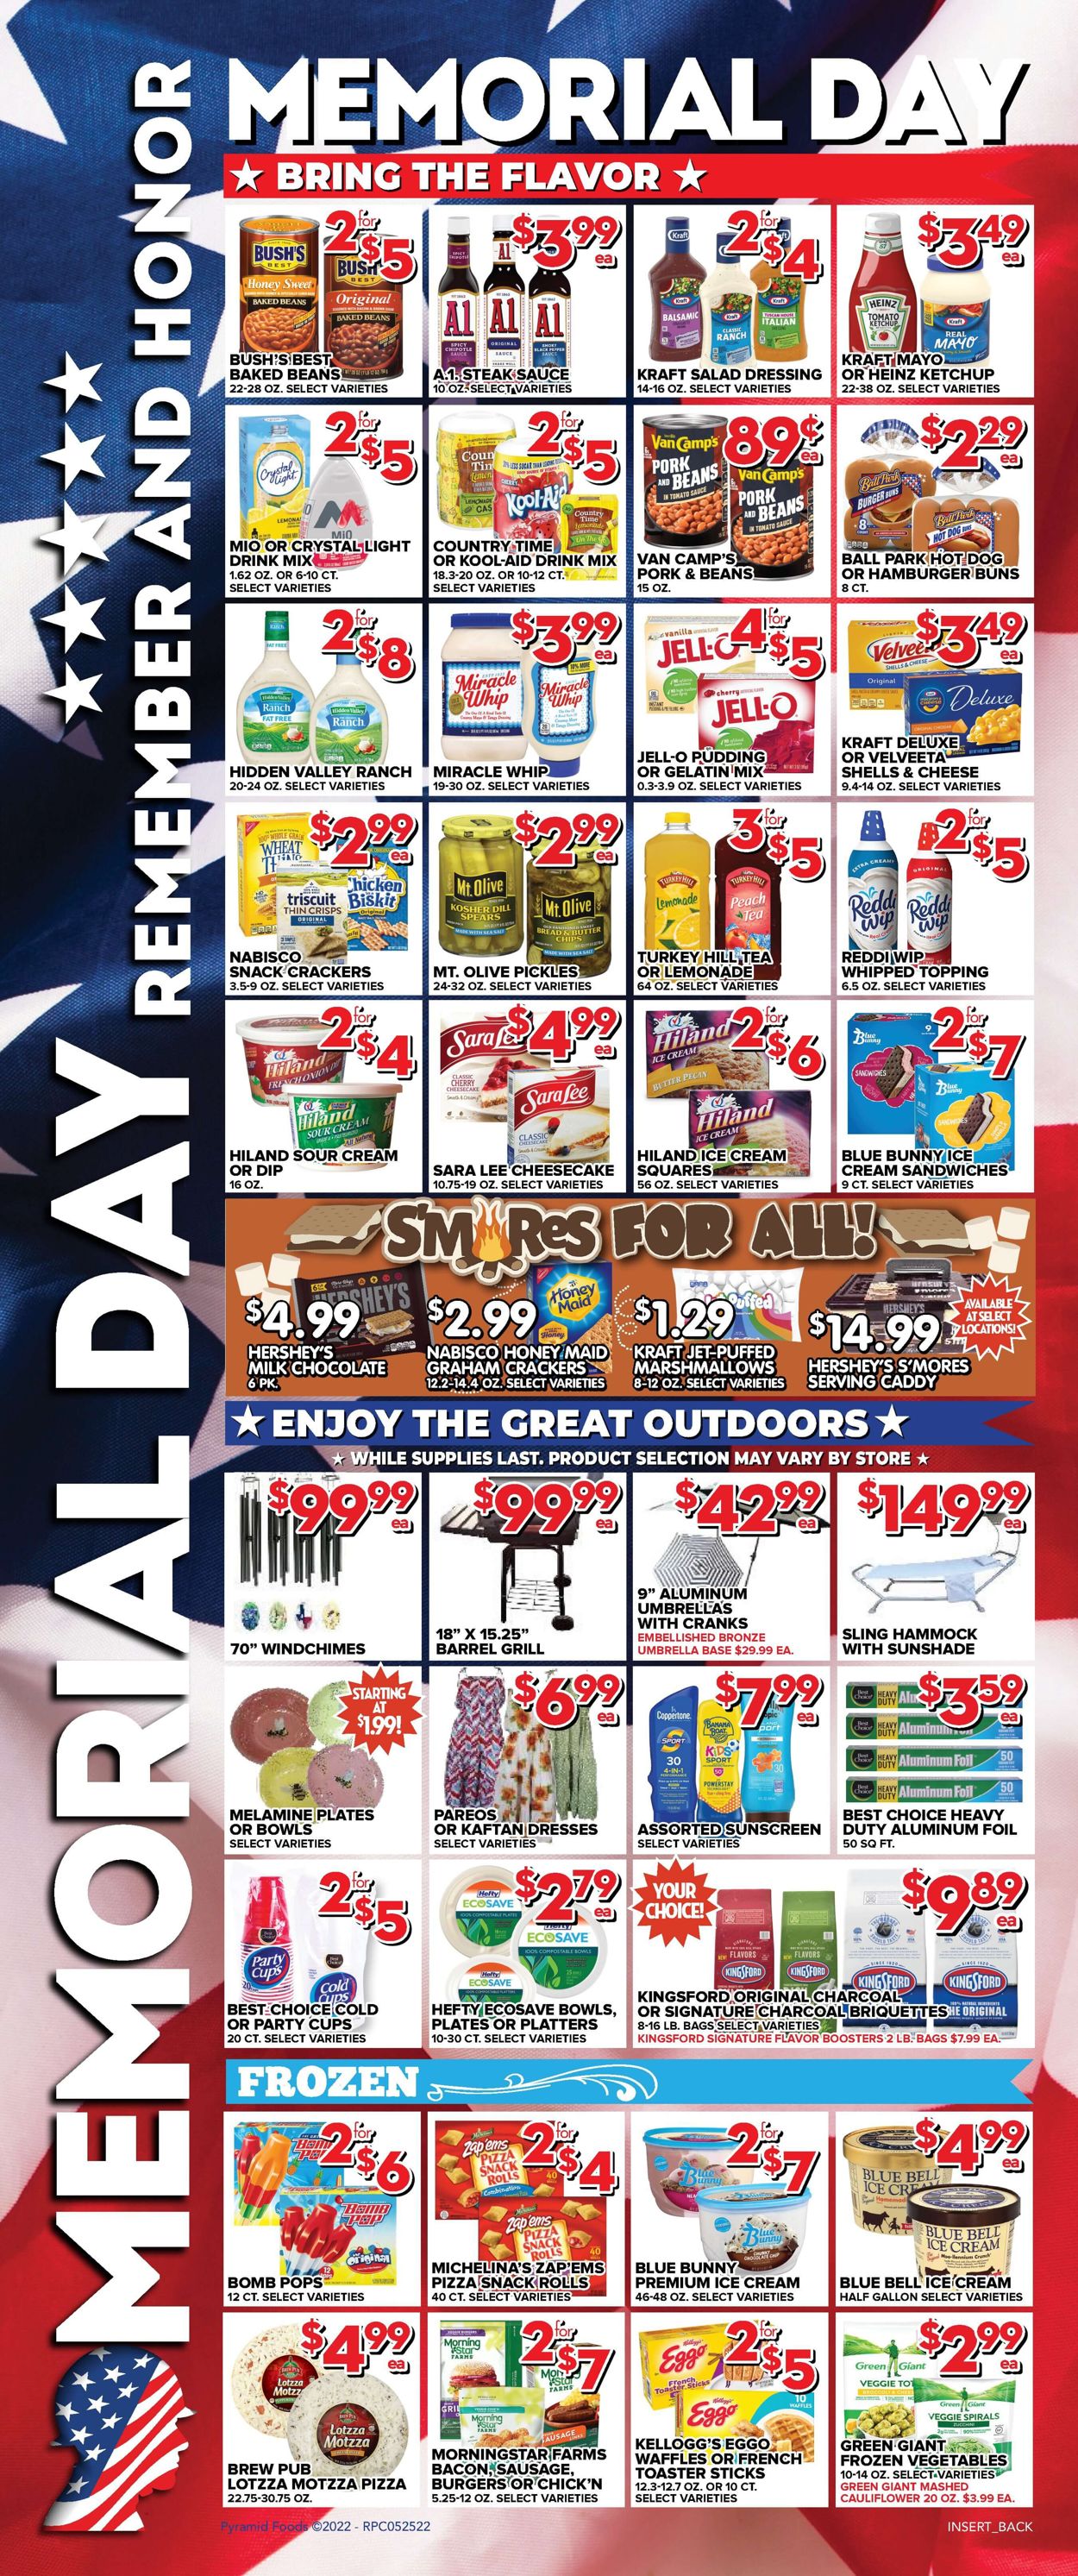 Price Cutter Weekly Ad Circular - valid 05/25-05/31/2022 (Page 4)